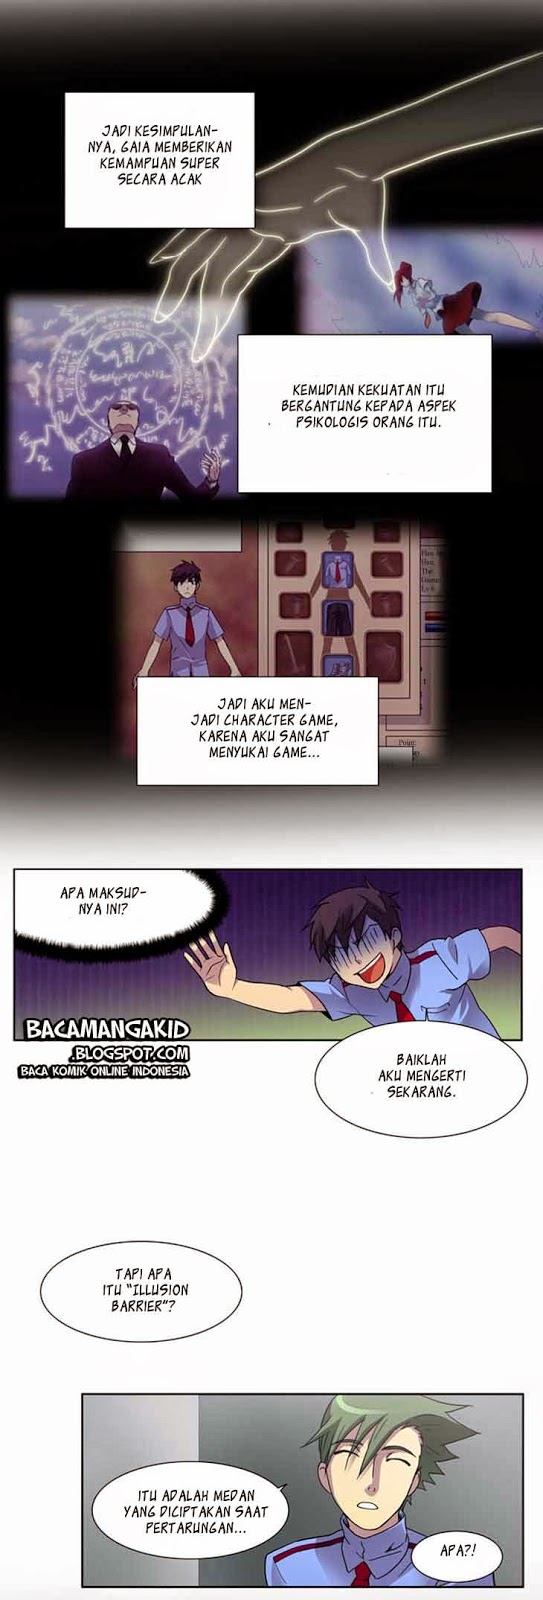 The Gamer Chapter 08